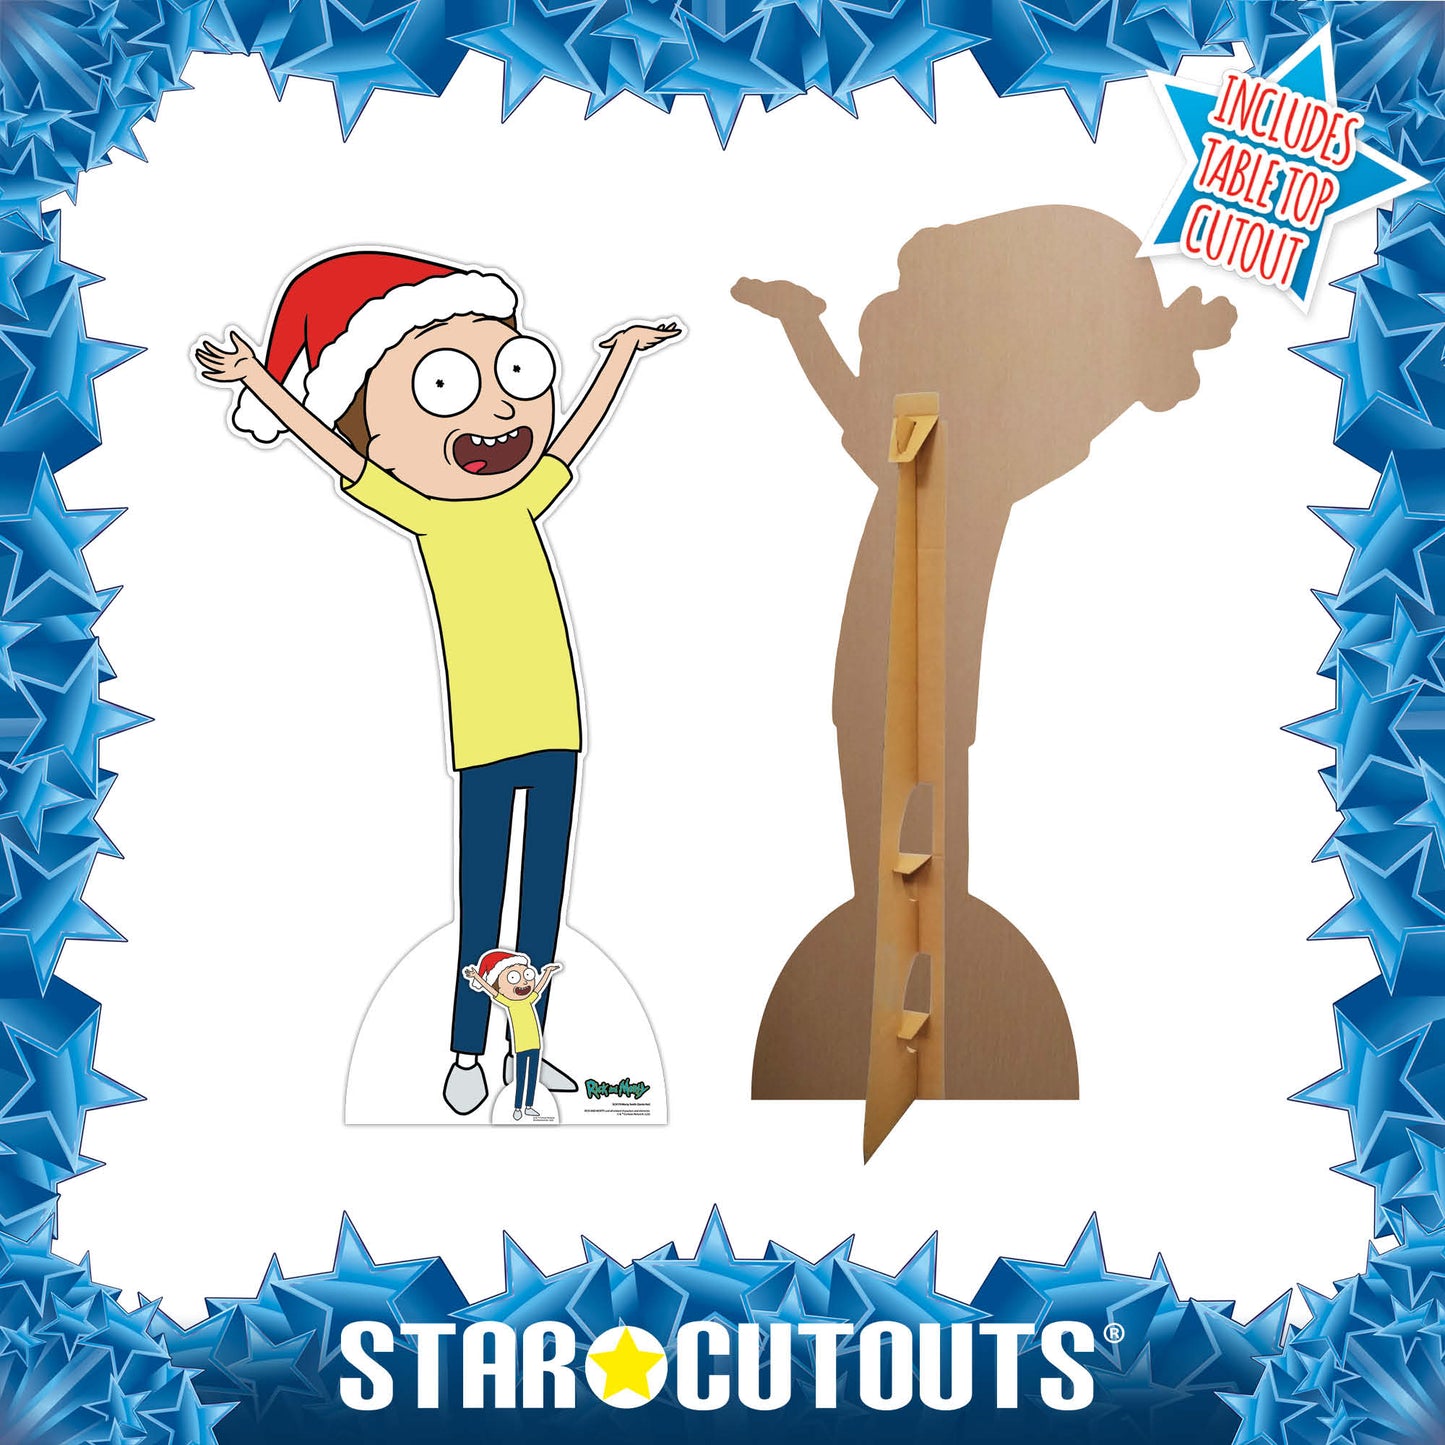 SC4179 Morty Smith Happy Christmas Rick and Morty Cardboard Cut Out Height 160cm